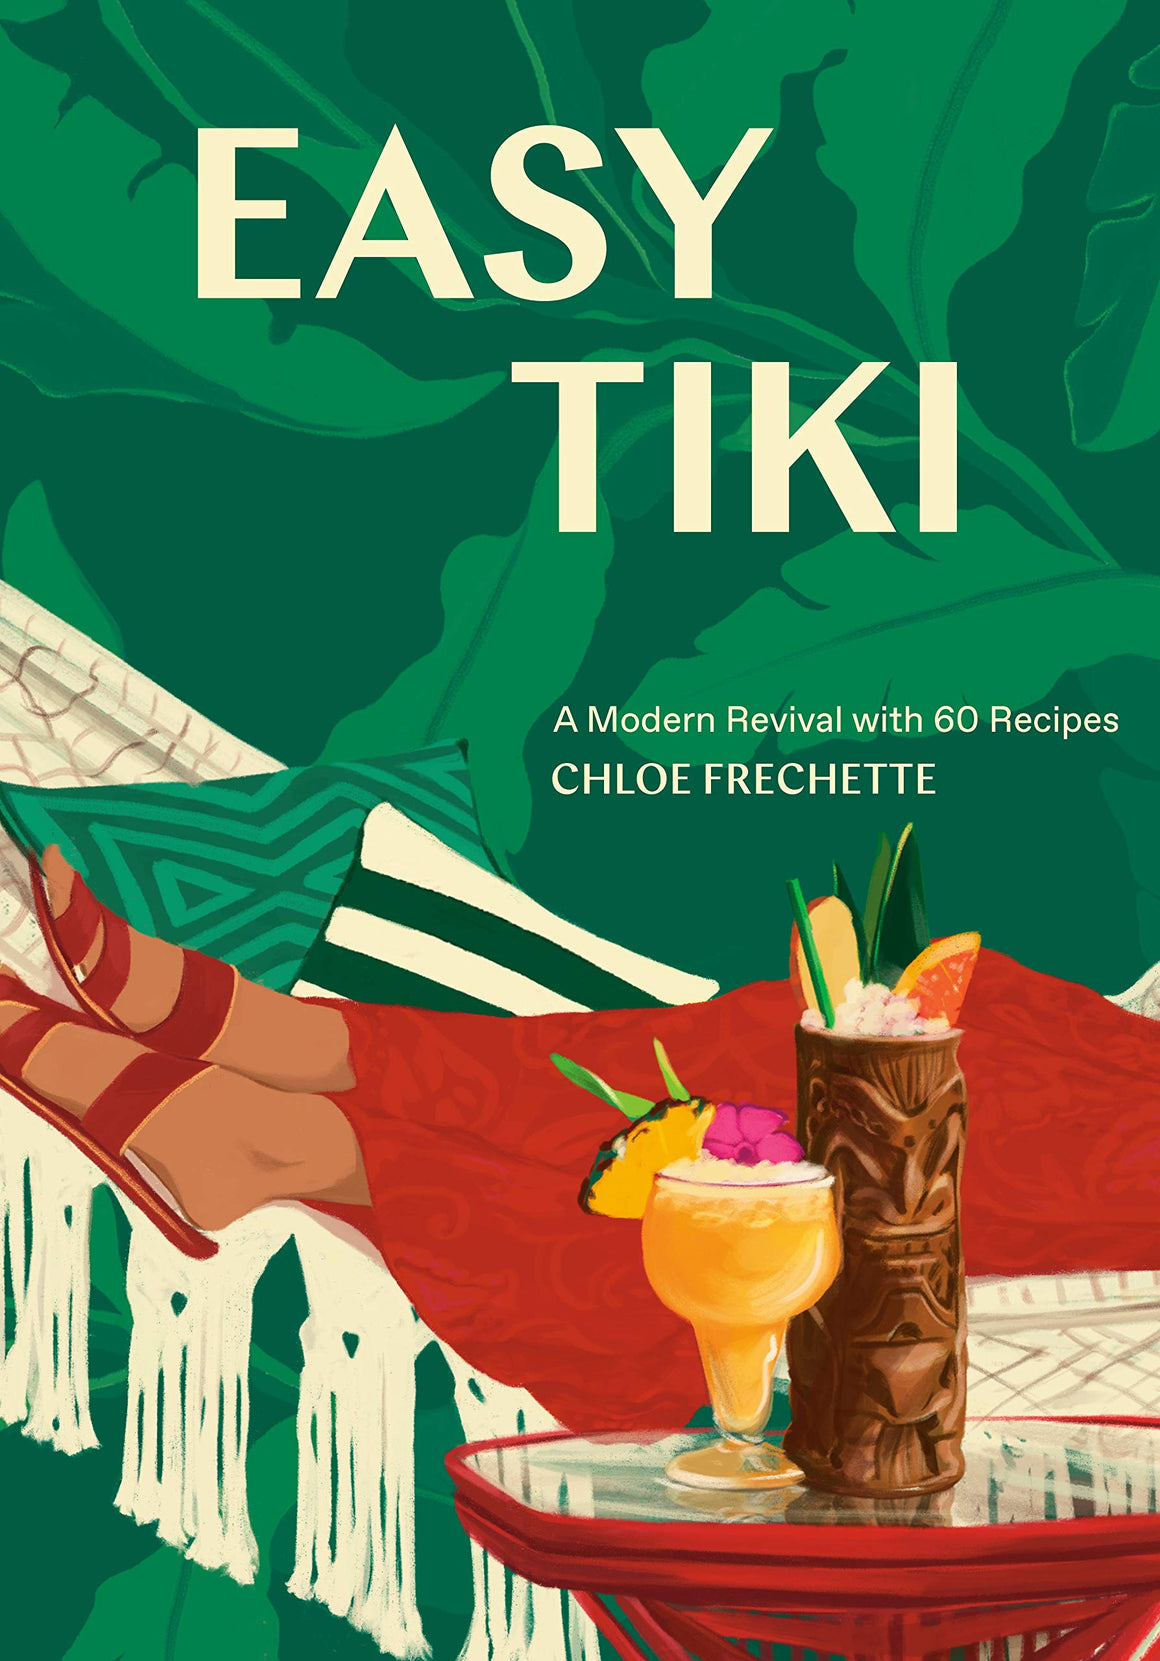 (Cocktails) Chloe Frechette. Easy Tiki: A Modern Revival with 60 Recipes.